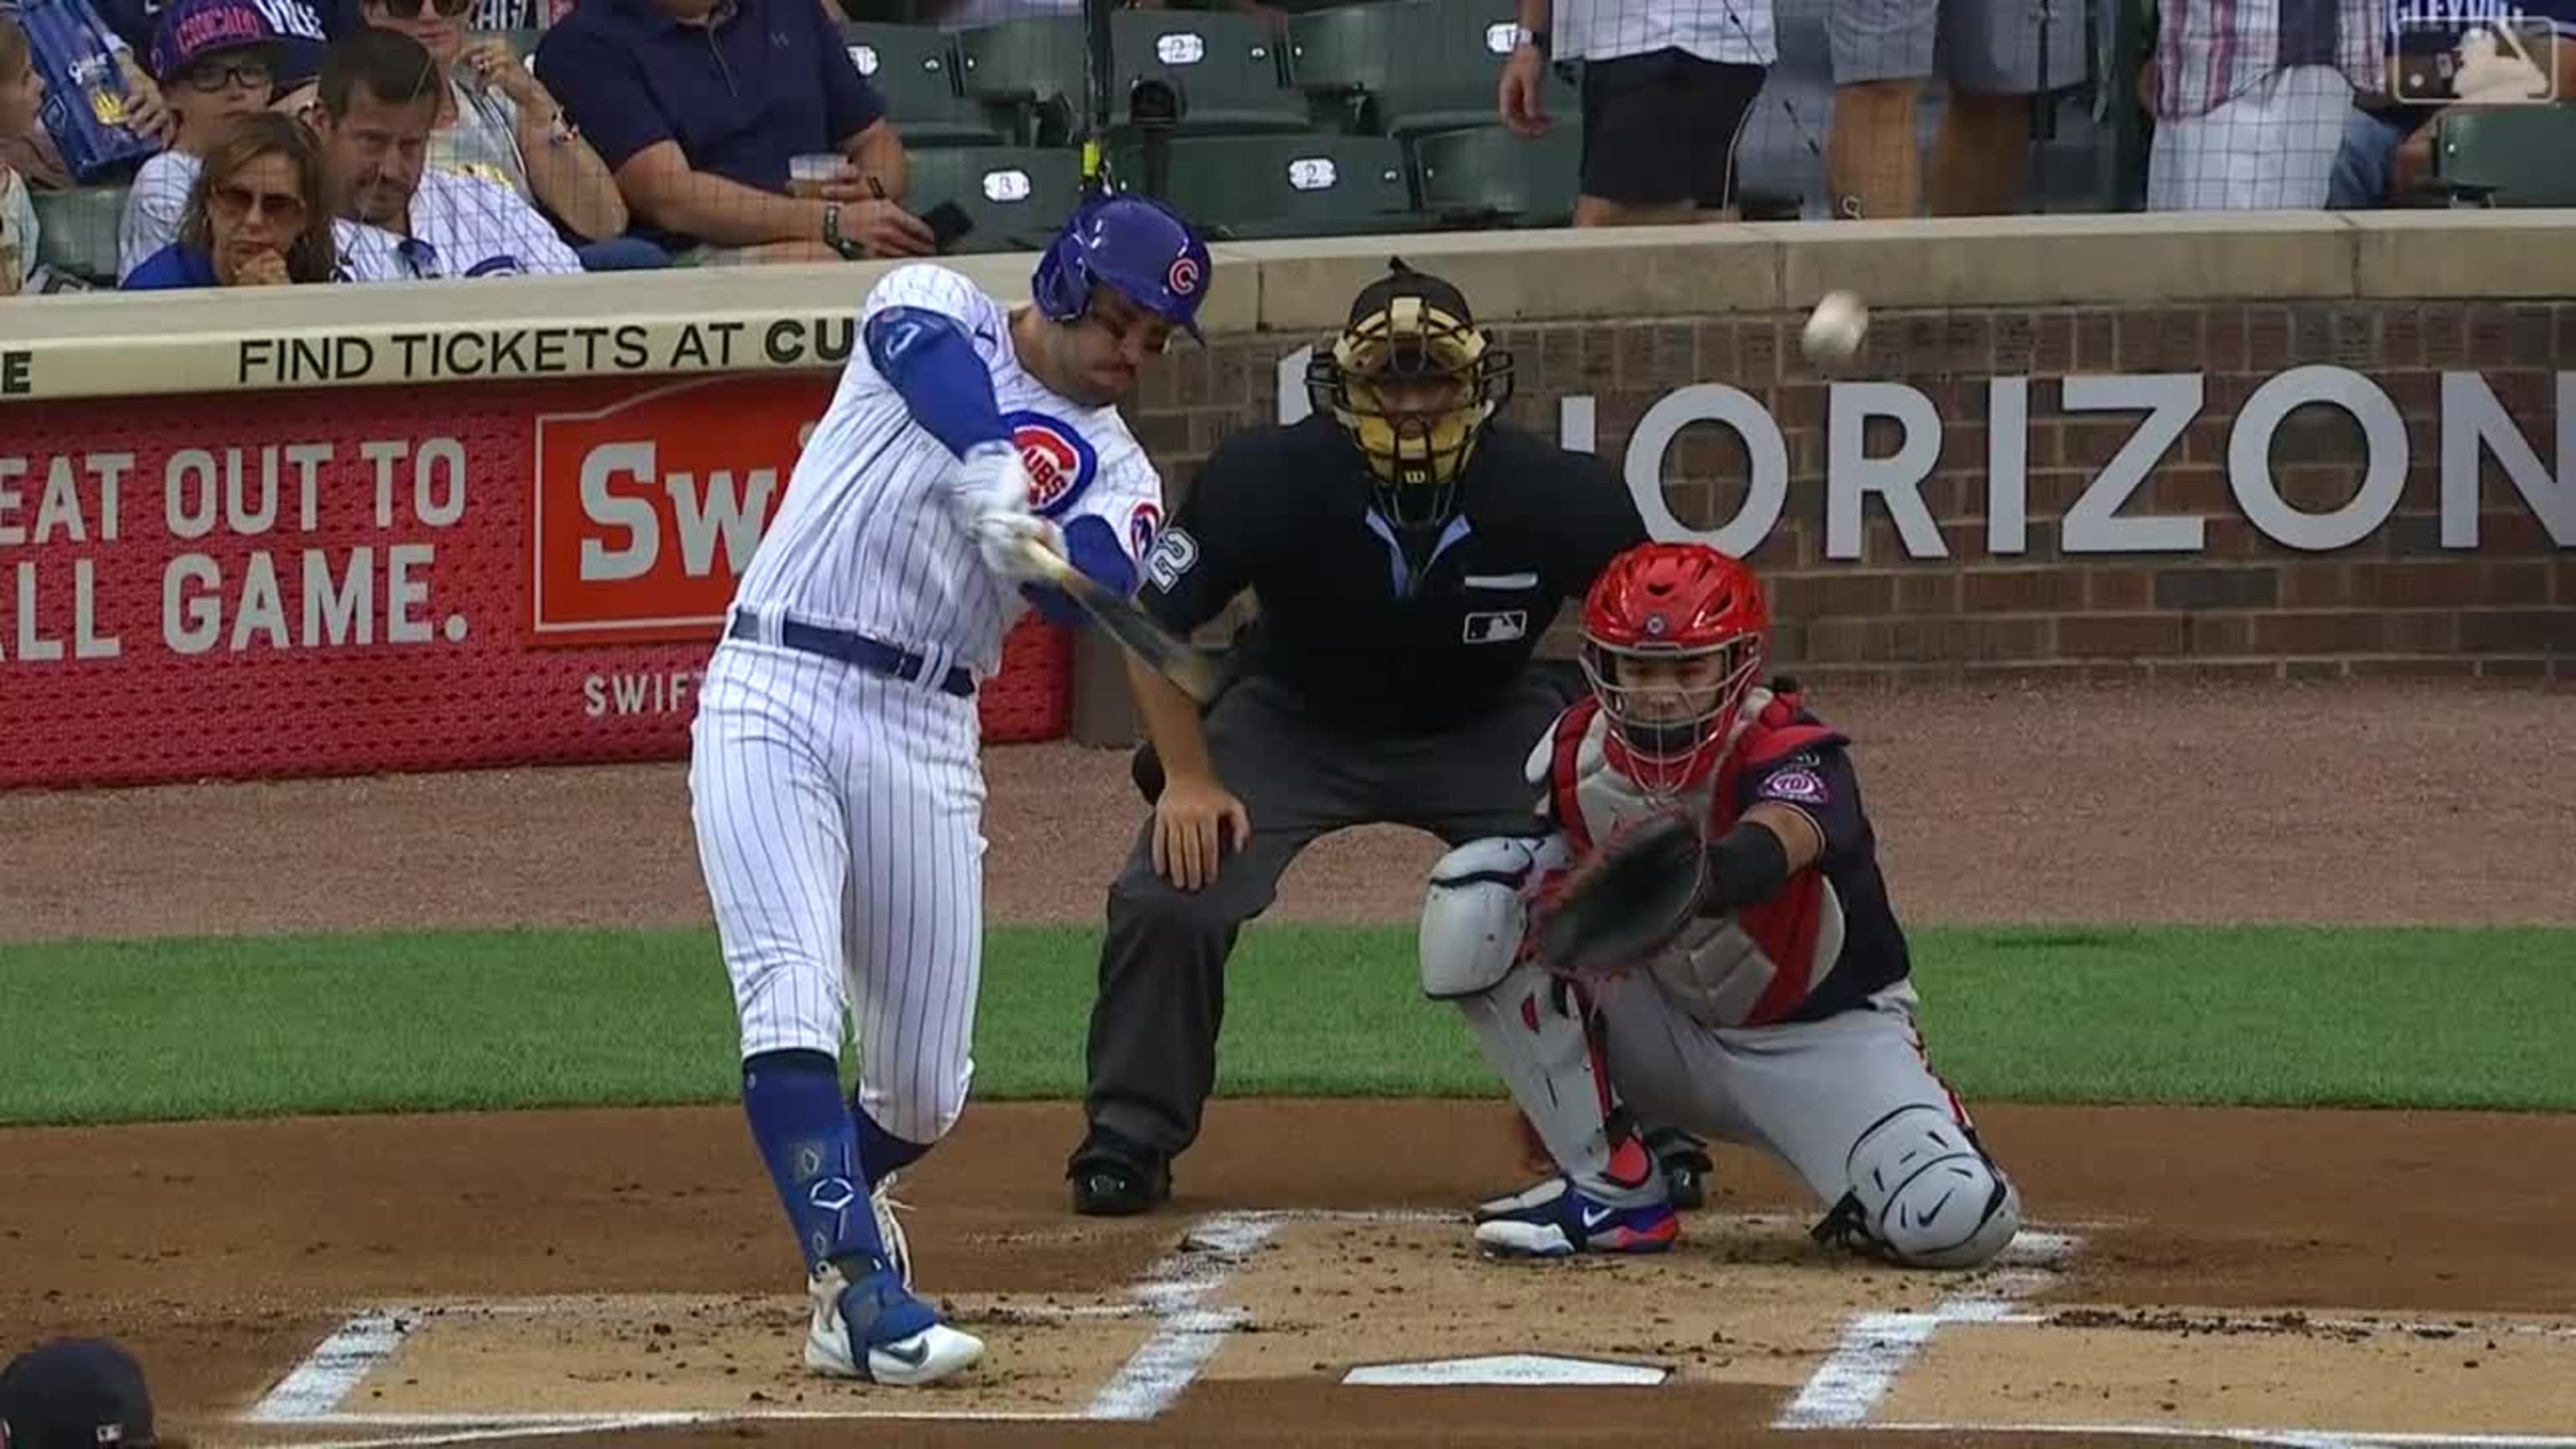 MLB Opening Day: Cubs Nico Hoerner smashes home first HR of season